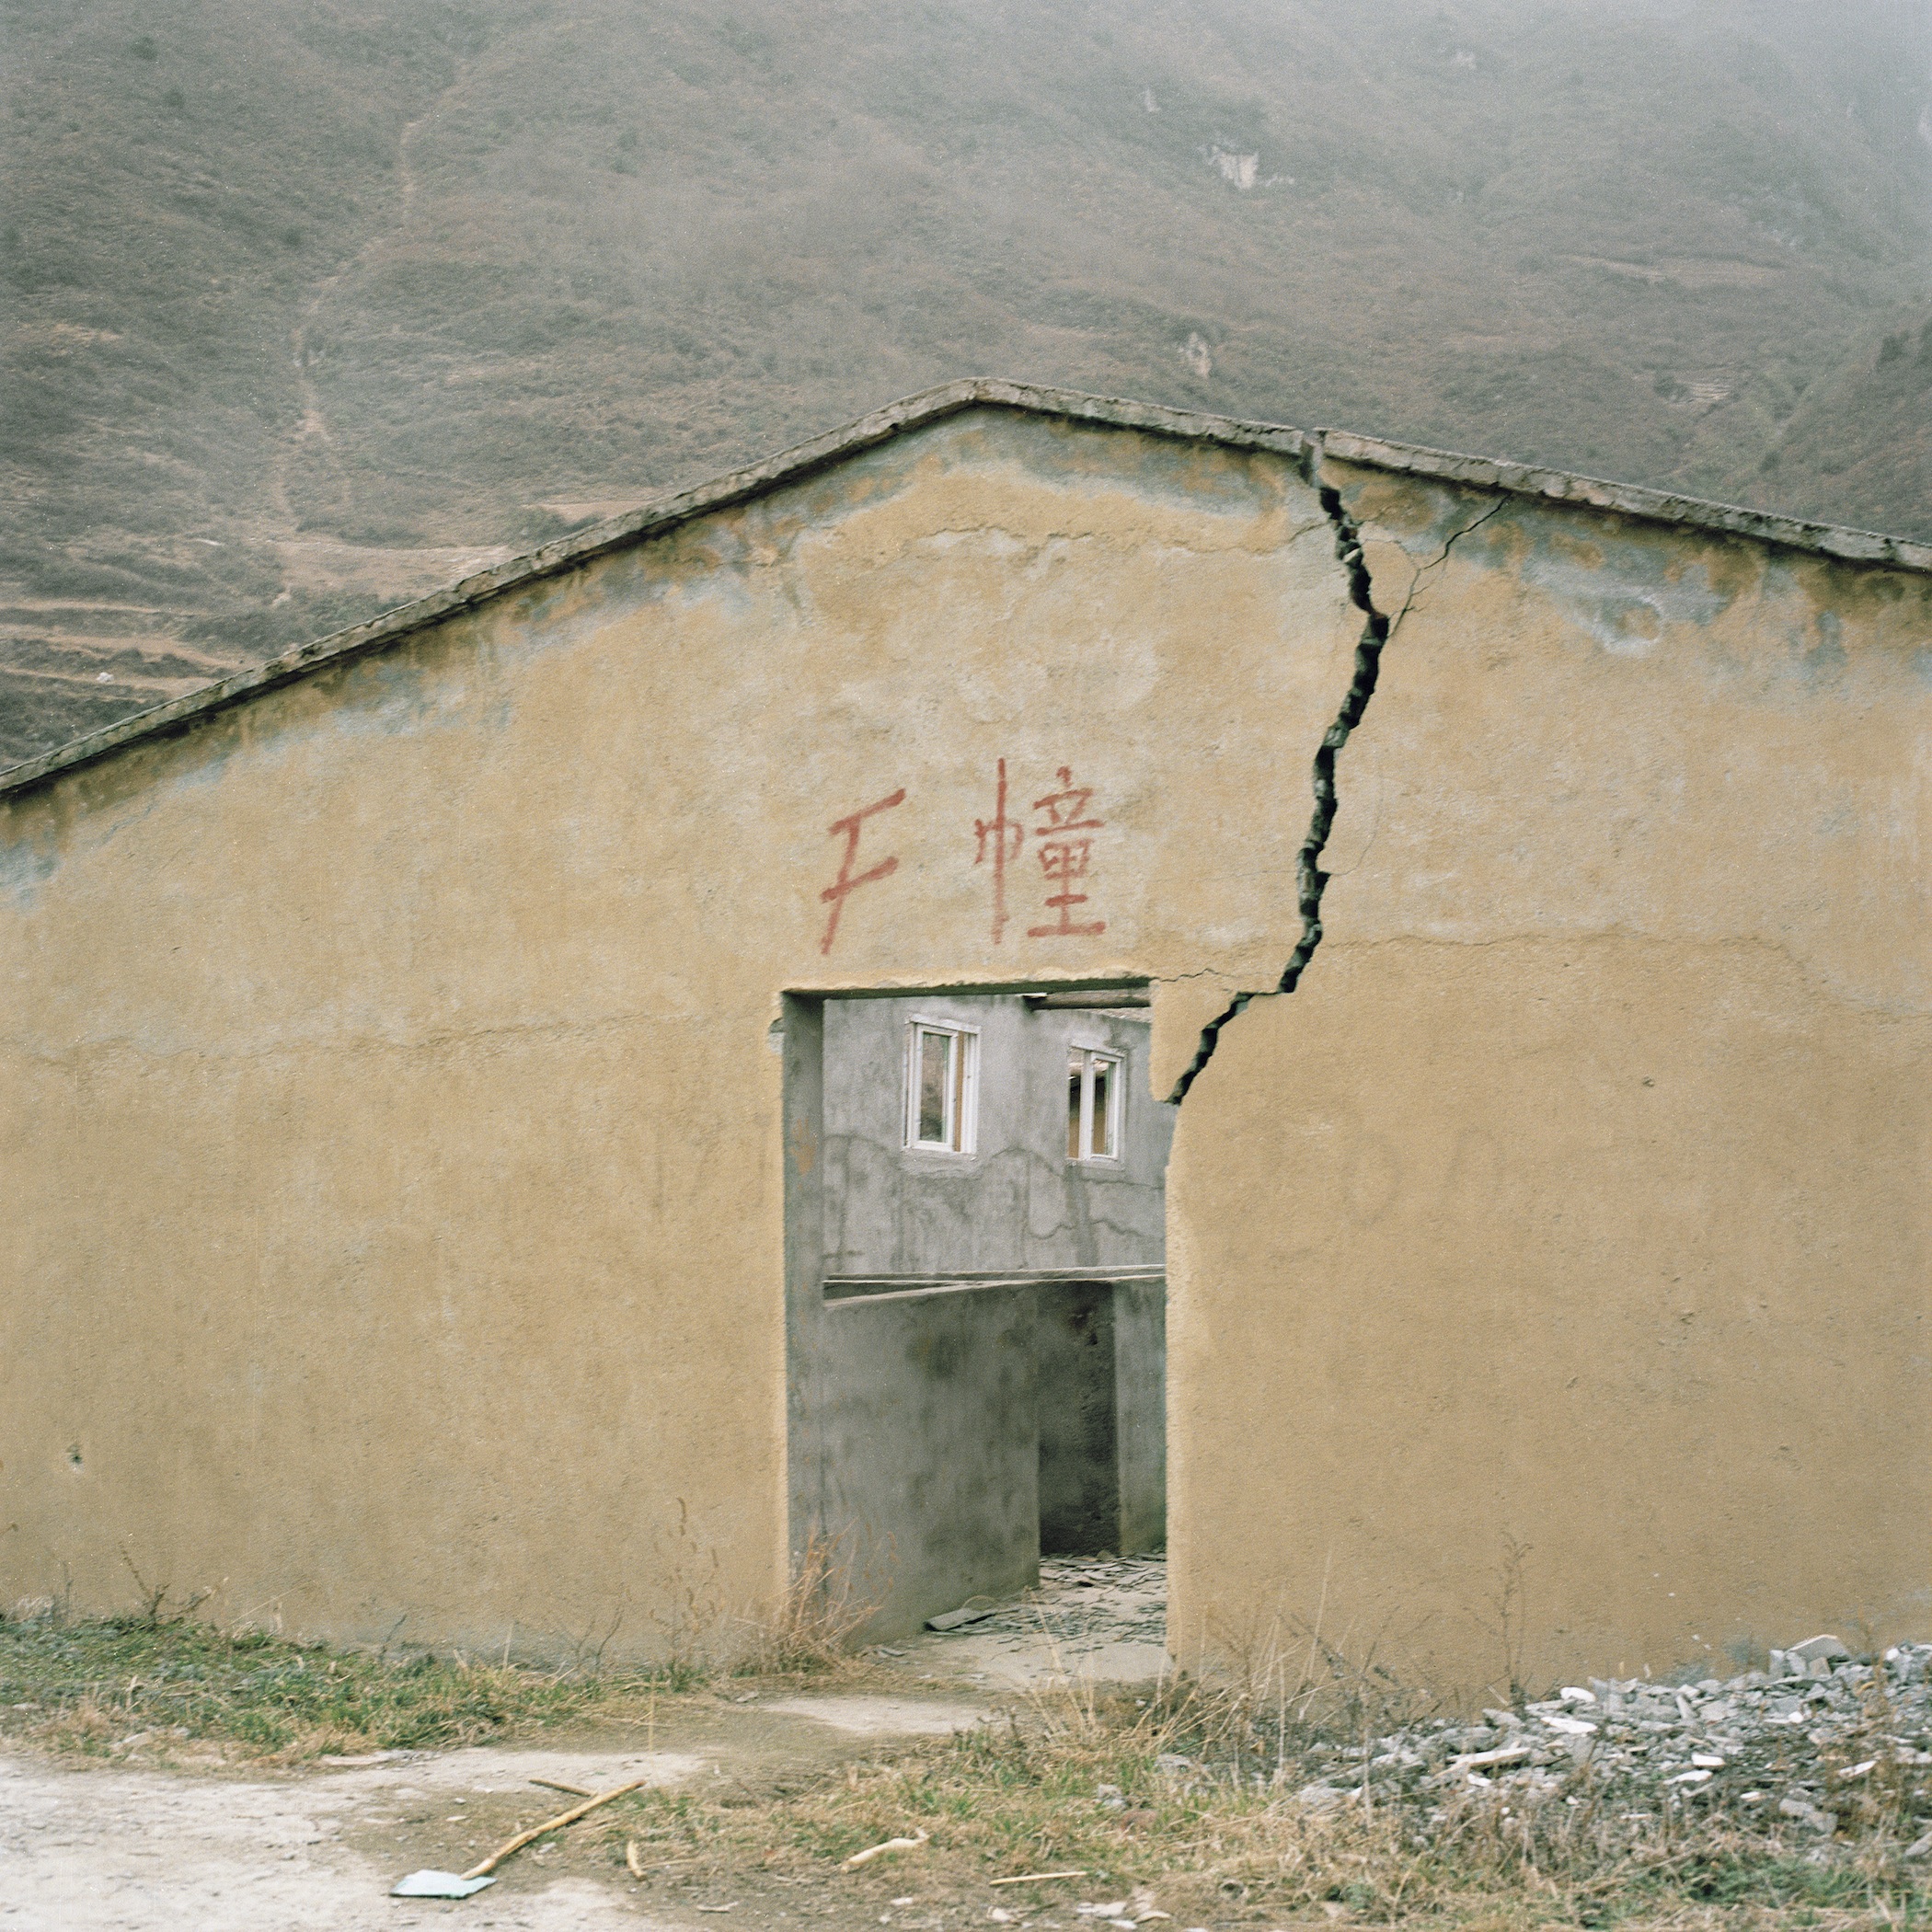 Deserted Collective pig Shed Built with Post-Earthquake Reconstruction Funds, Radish Village, Sichuan, China, March 2016